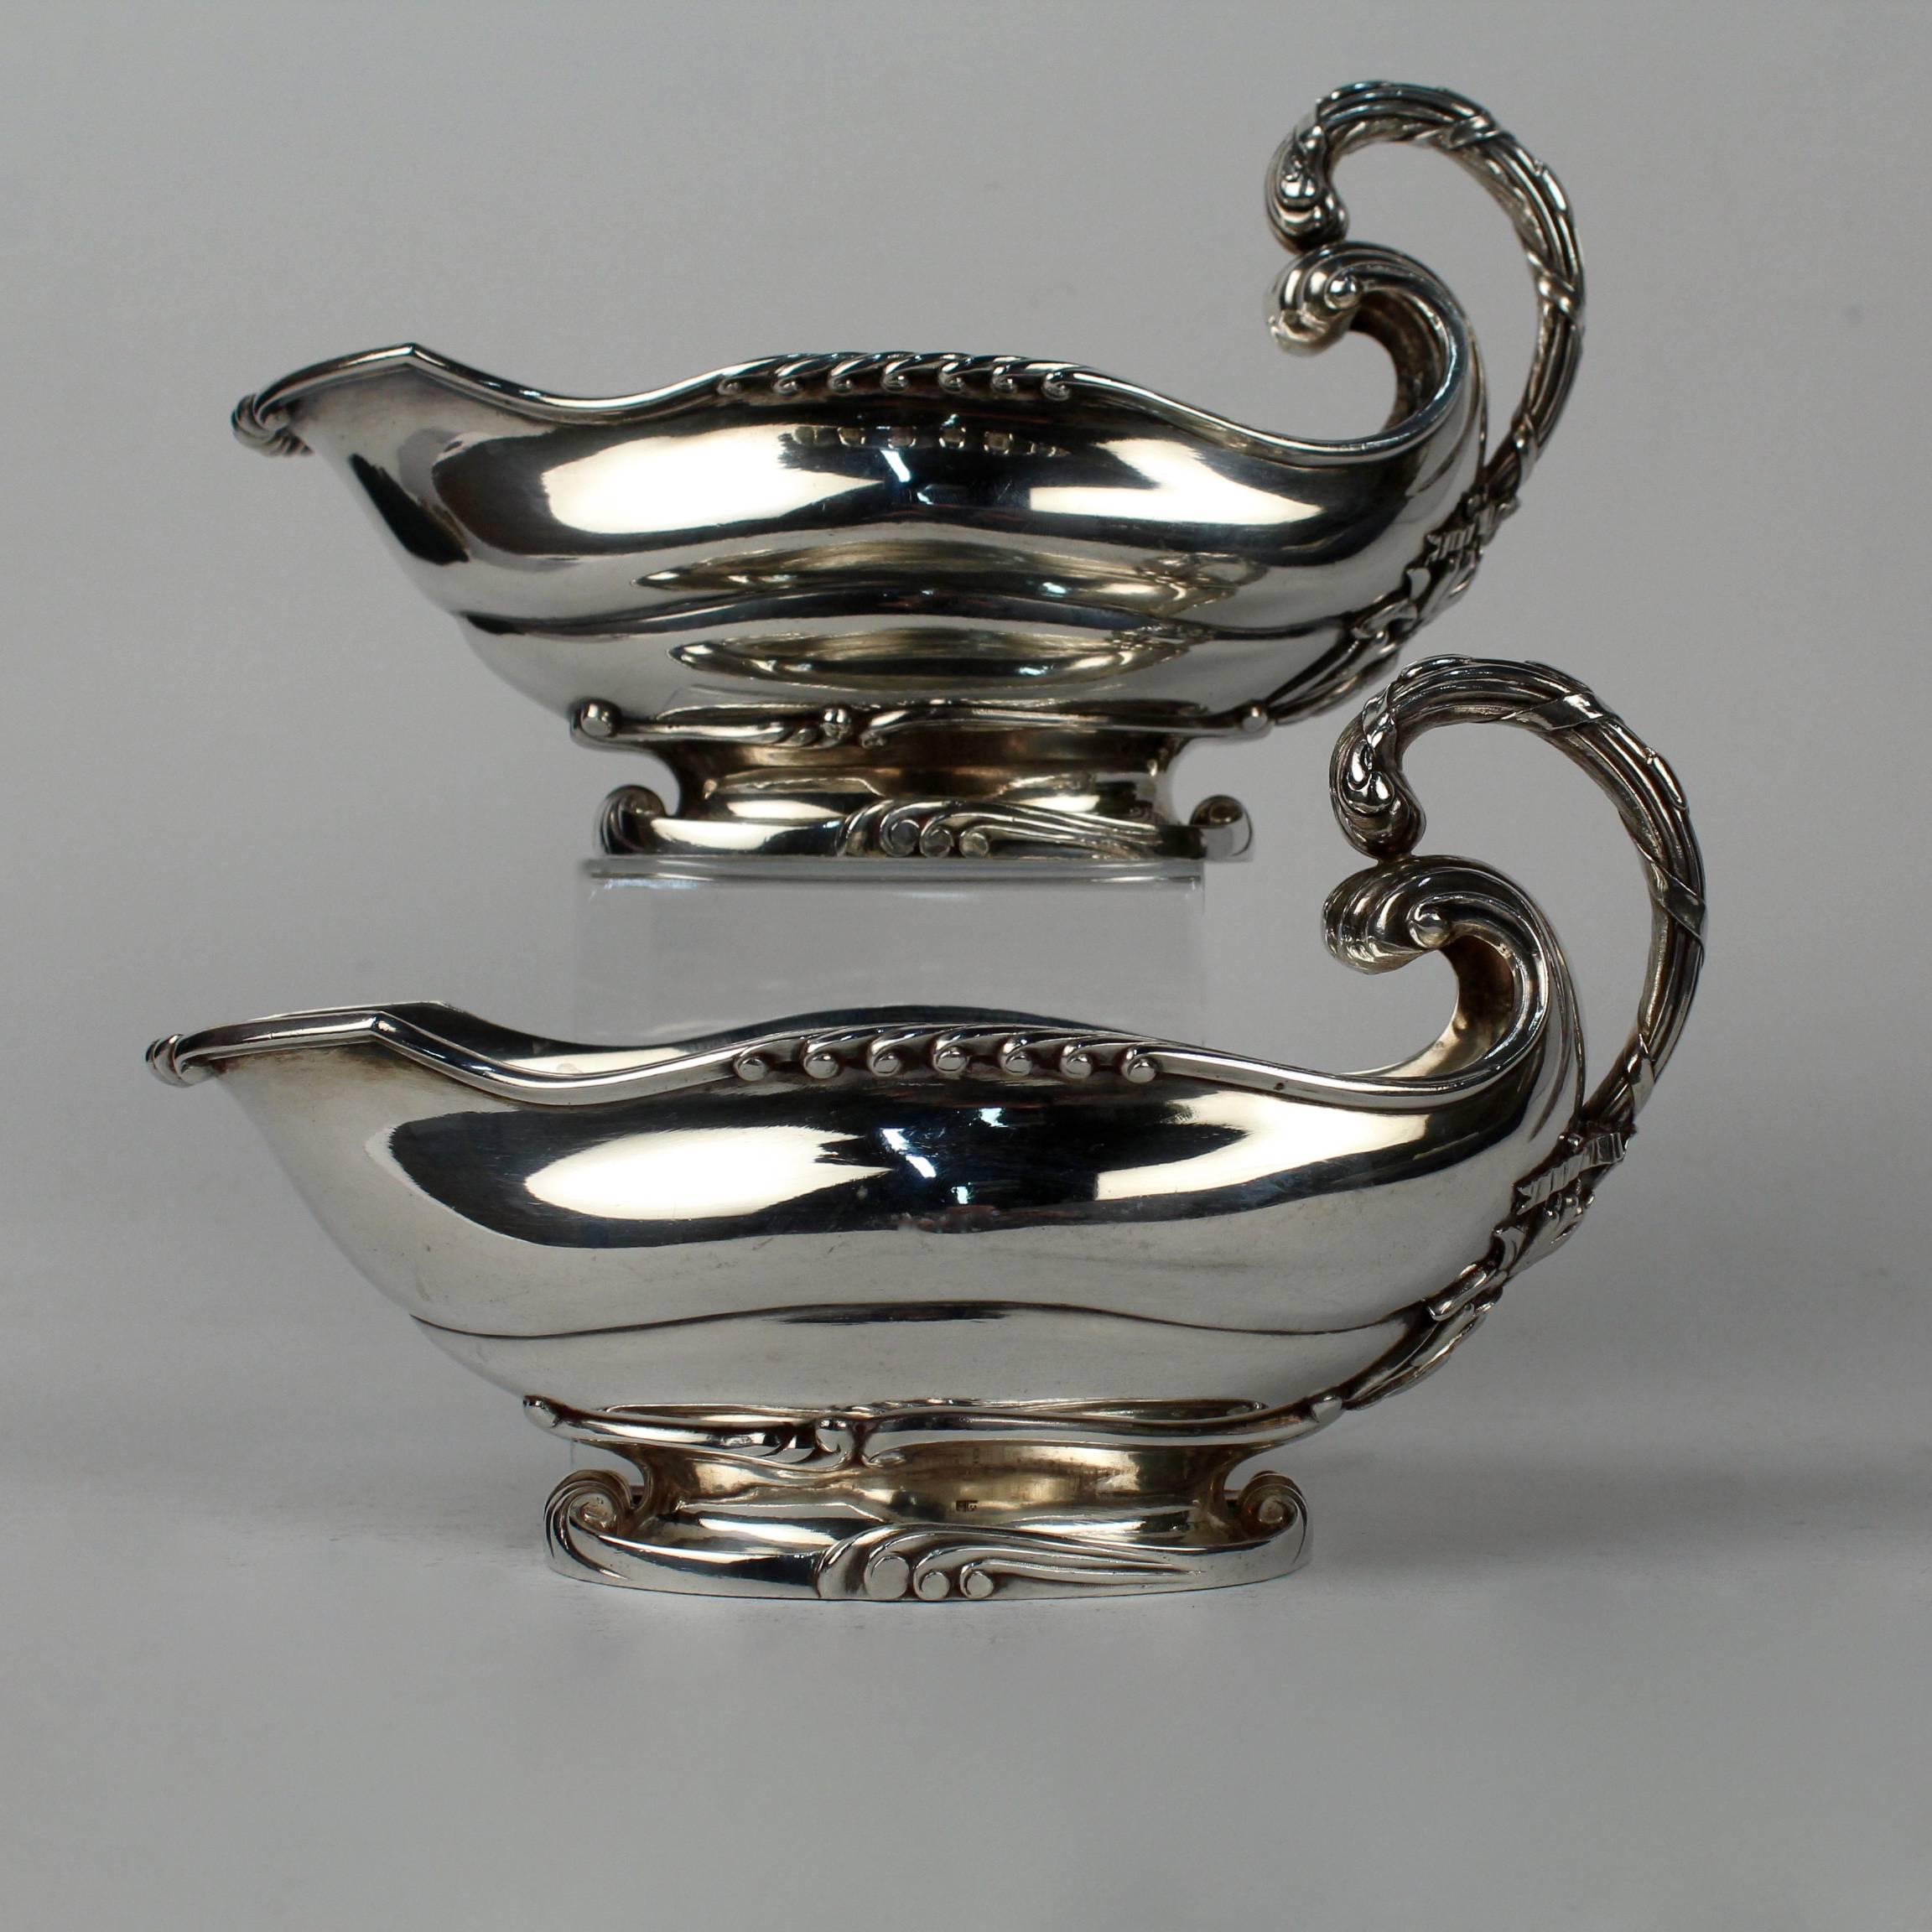 An incredibly heavy pair of period Art Nouveau Dutch sterling silver sauce boats from a large service by Ph. Saakes of the Hague. 

These pieces are likely from a commissioned service. Saakes was a Dutch gold and silversmith in the late 19th and